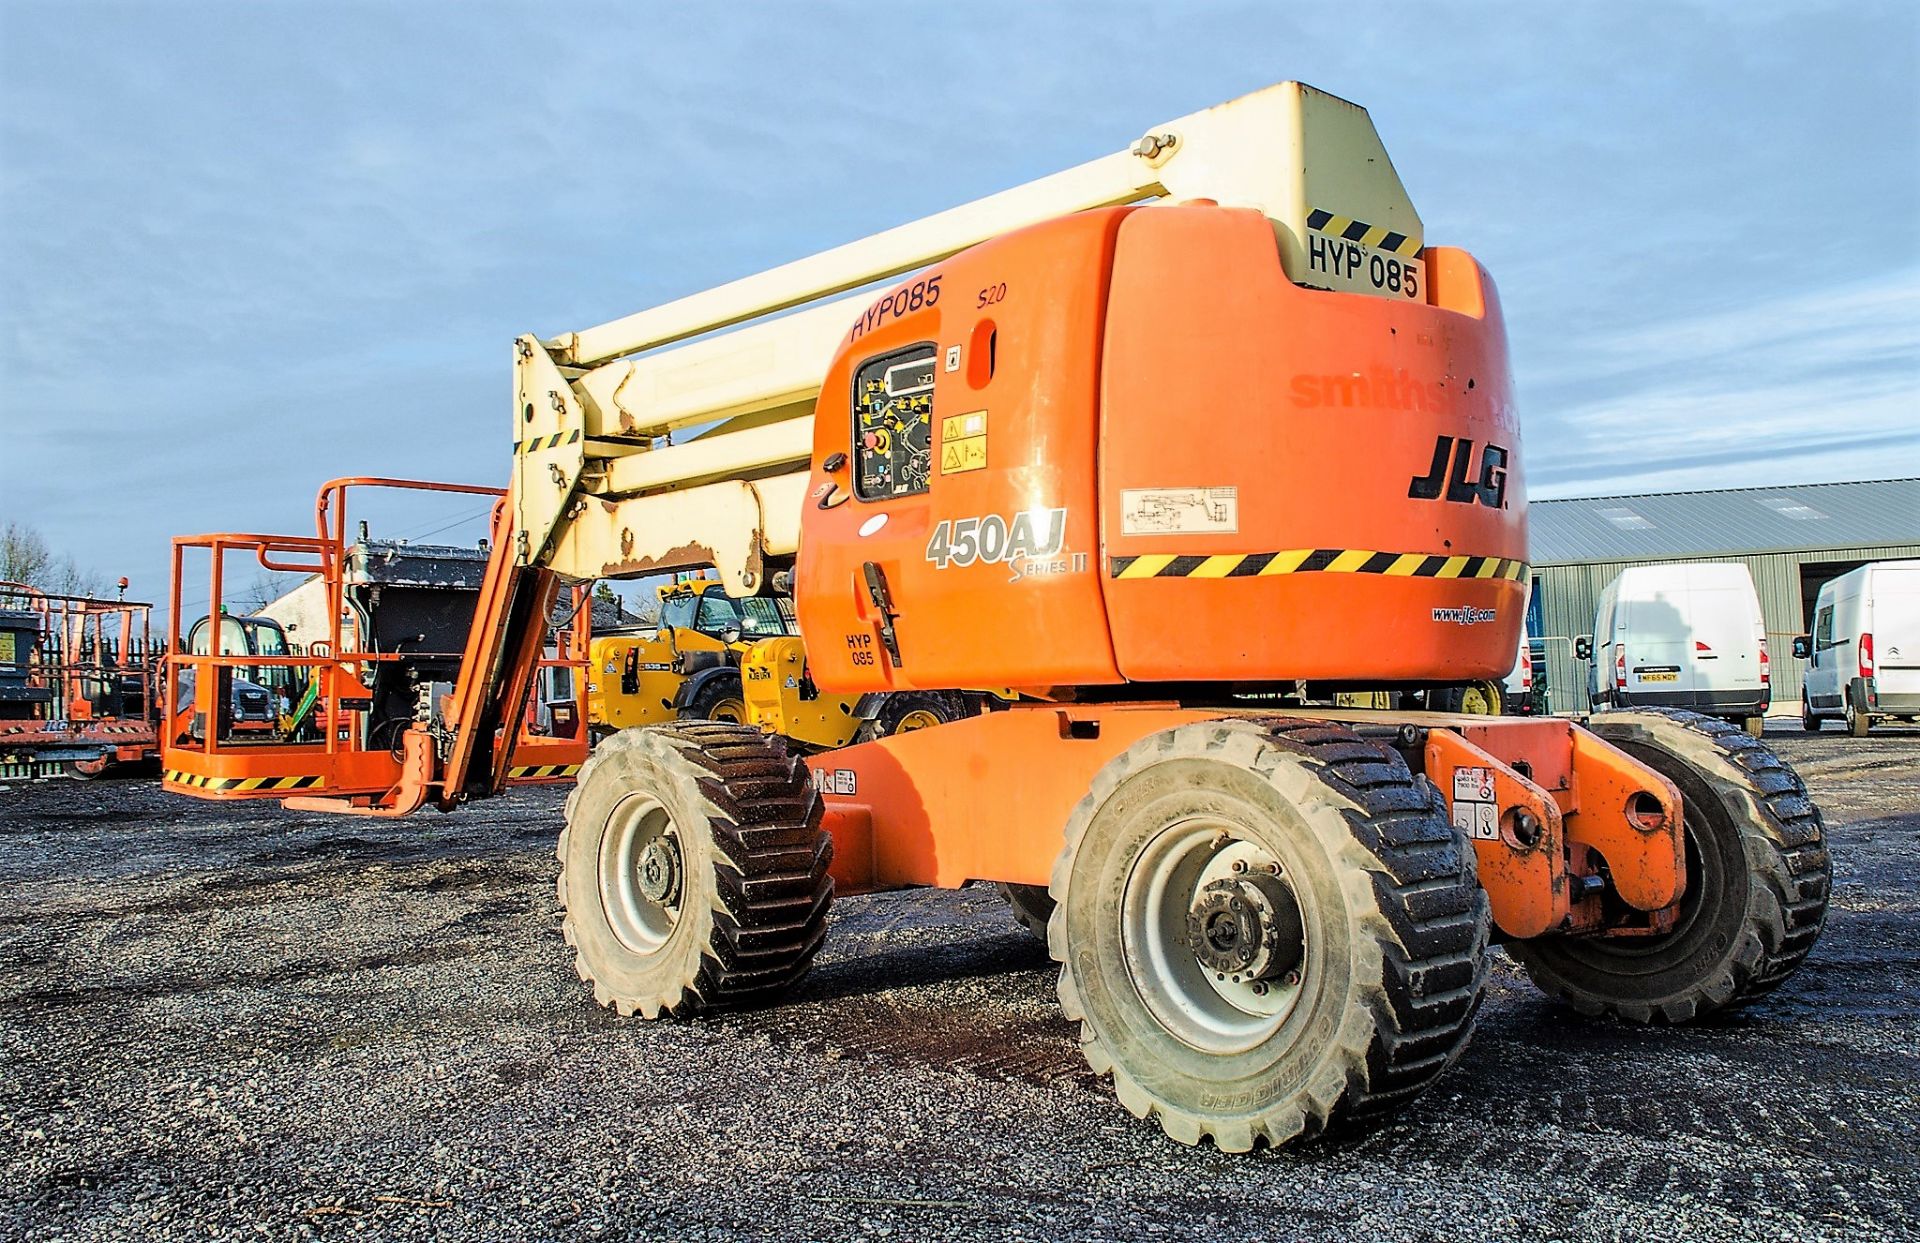 JLG 450AJ diesel driven rough terrain articulated boom access platform Year: 2007 S/N: 5190 Recorded - Image 3 of 17